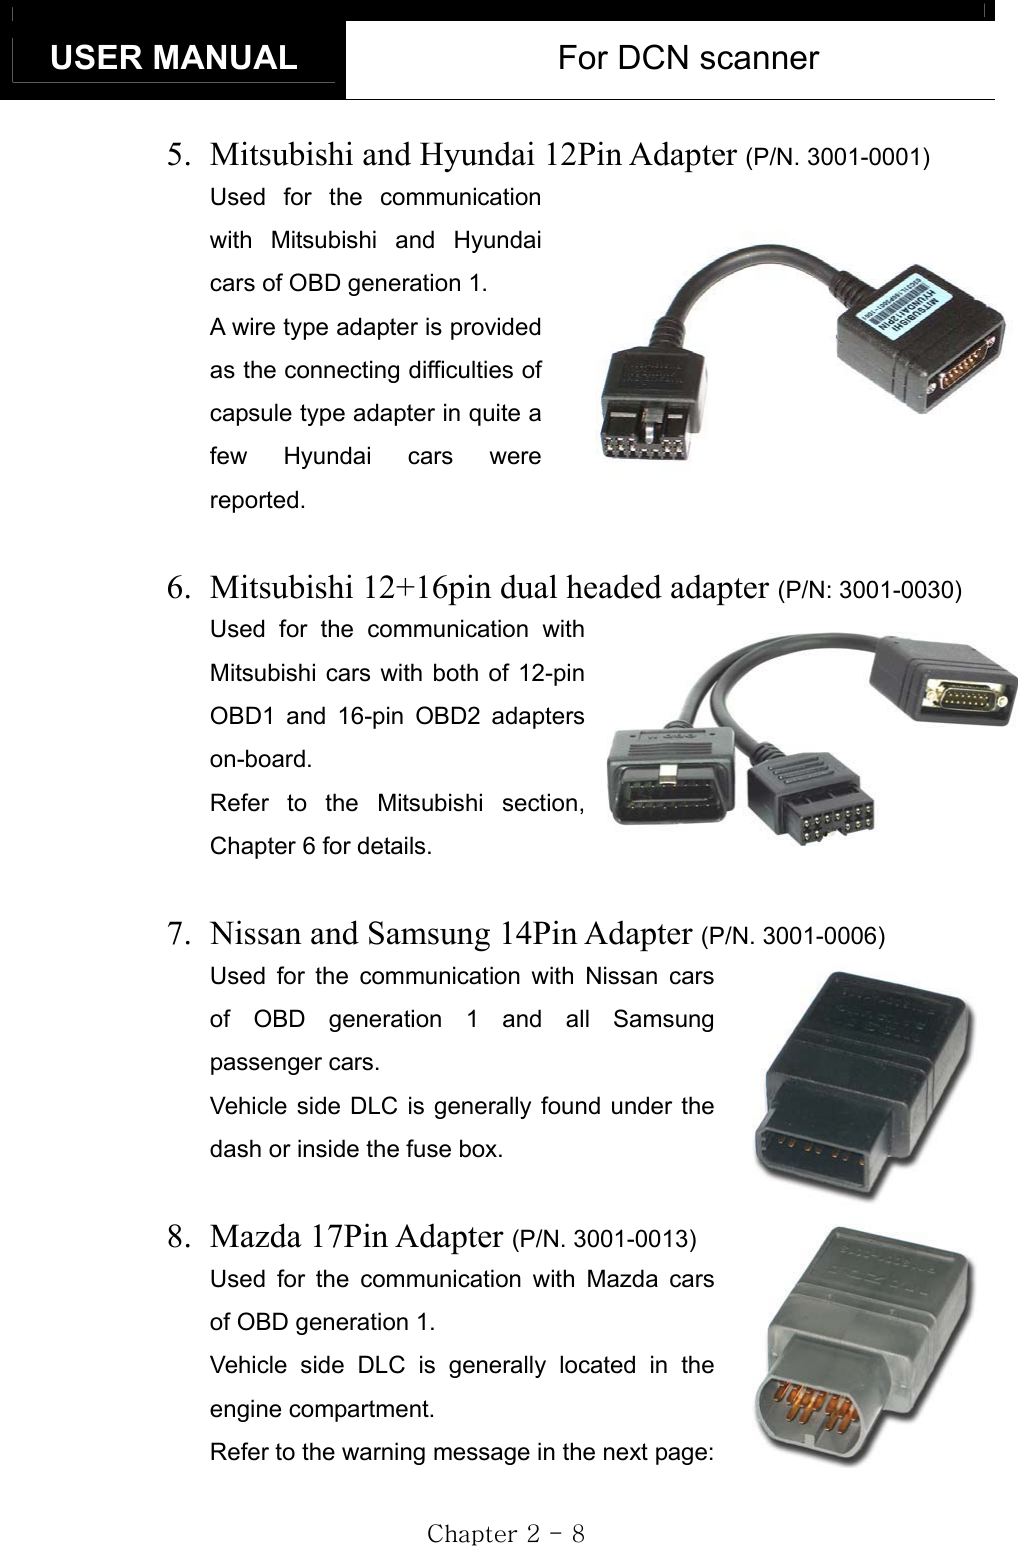 USER MANUAL  For DCN scanner GjGYGTG_G5.  Mitsubishi and Hyundai 12Pin Adapter (P/N. 3001-0001)Used for the communication with Mitsubishi and Hyundai cars of OBD generation 1.     A wire type adapter is provided as the connecting difficulties of capsule type adapter in quite a few Hyundai cars were reported. 6.  Mitsubishi 12+16pin dual headed adapter (P/N: 3001-0030)Used for the communication with Mitsubishi cars with both of 12-pin OBD1 and 16-pin OBD2 adapters on-board. Refer to the Mitsubishi section, Chapter 6 for details. 7.  Nissan and Samsung 14Pin Adapter (P/N. 3001-0006)Used for the communication with Nissan cars of OBD generation 1 and all Samsung passenger cars.     Vehicle side DLC is generally found under the dash or inside the fuse box. 8. Mazda 17Pin Adapter (P/N. 3001-0013)Used for the communication with Mazda cars of OBD generation 1. Vehicle side DLC is generally located in the engine compartment. Refer to the warning message in the next page: 